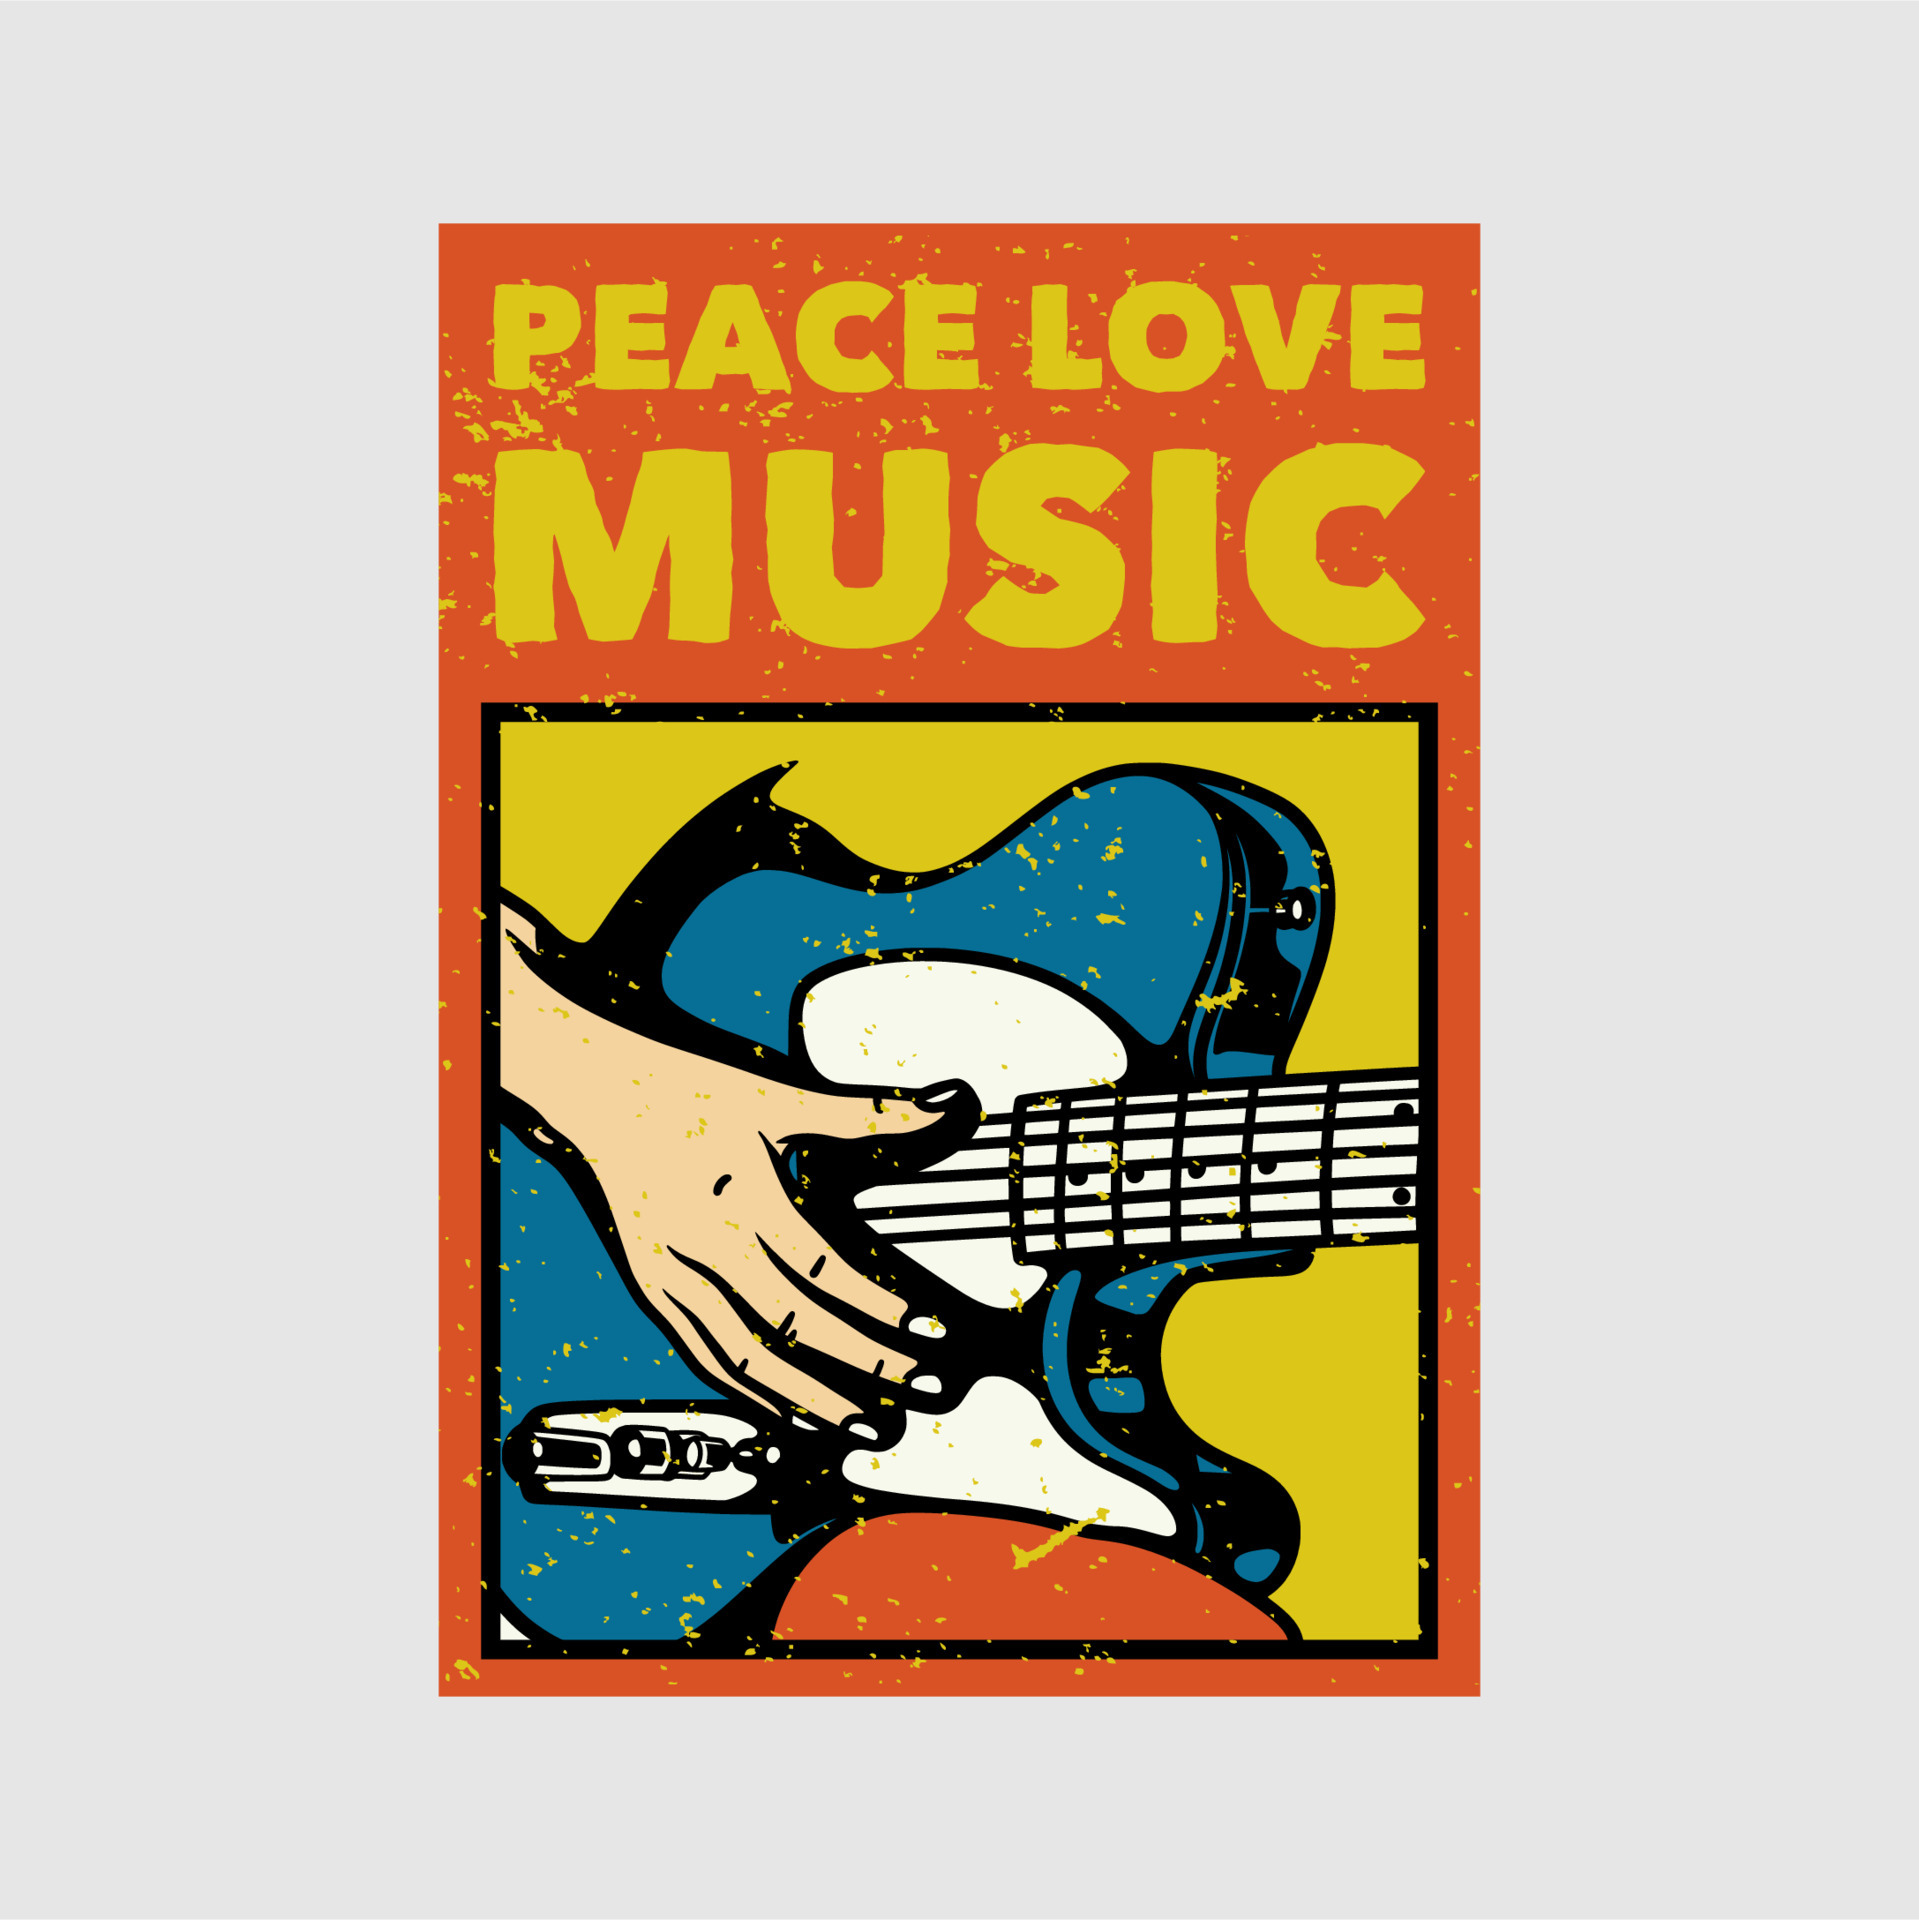 another love  Vintage music posters, Music poster ideas, Music poster  design